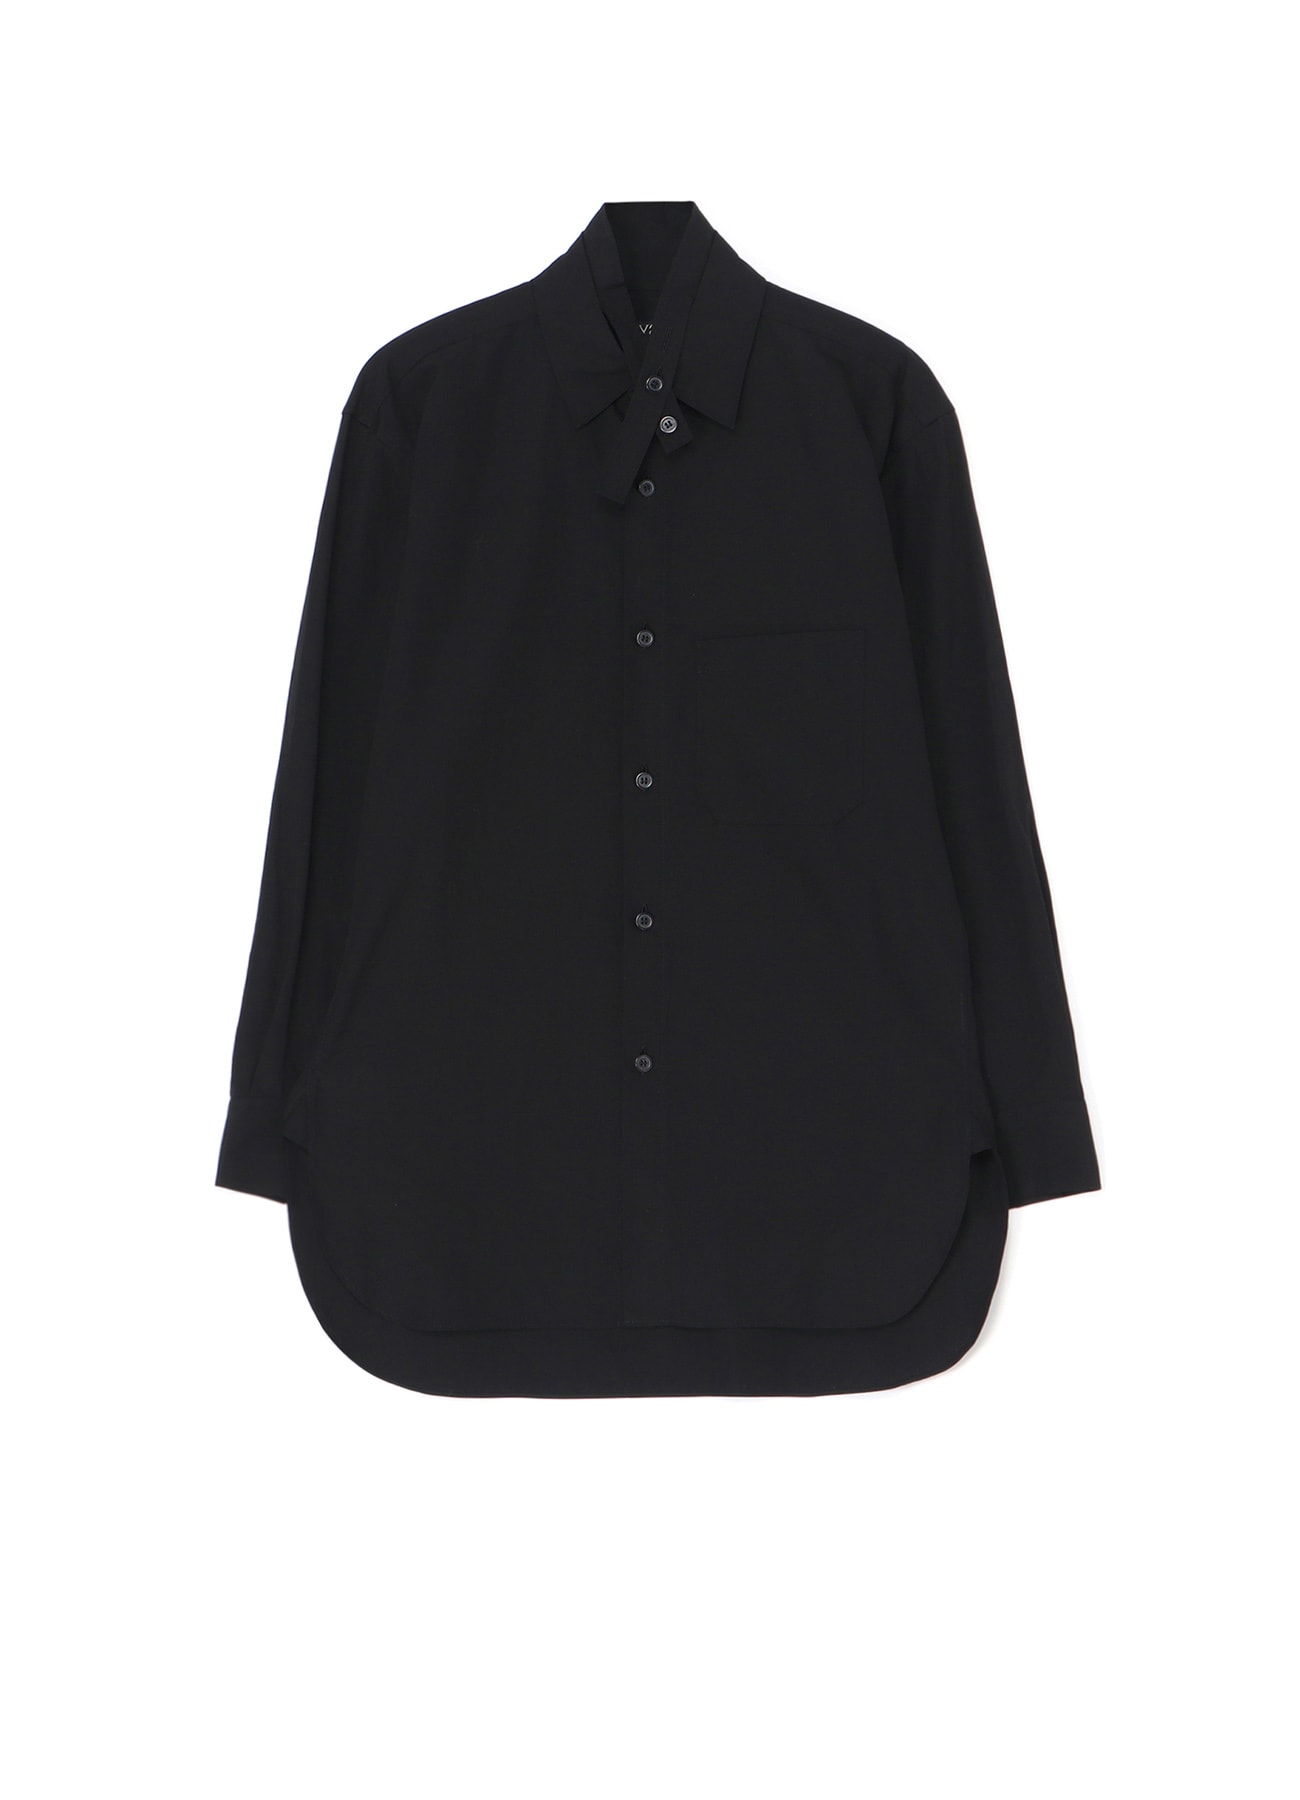 COTTON BROADCLOTH DOUBLE COLLAR SHIRT(S Black): Vintage 1.1｜THE 